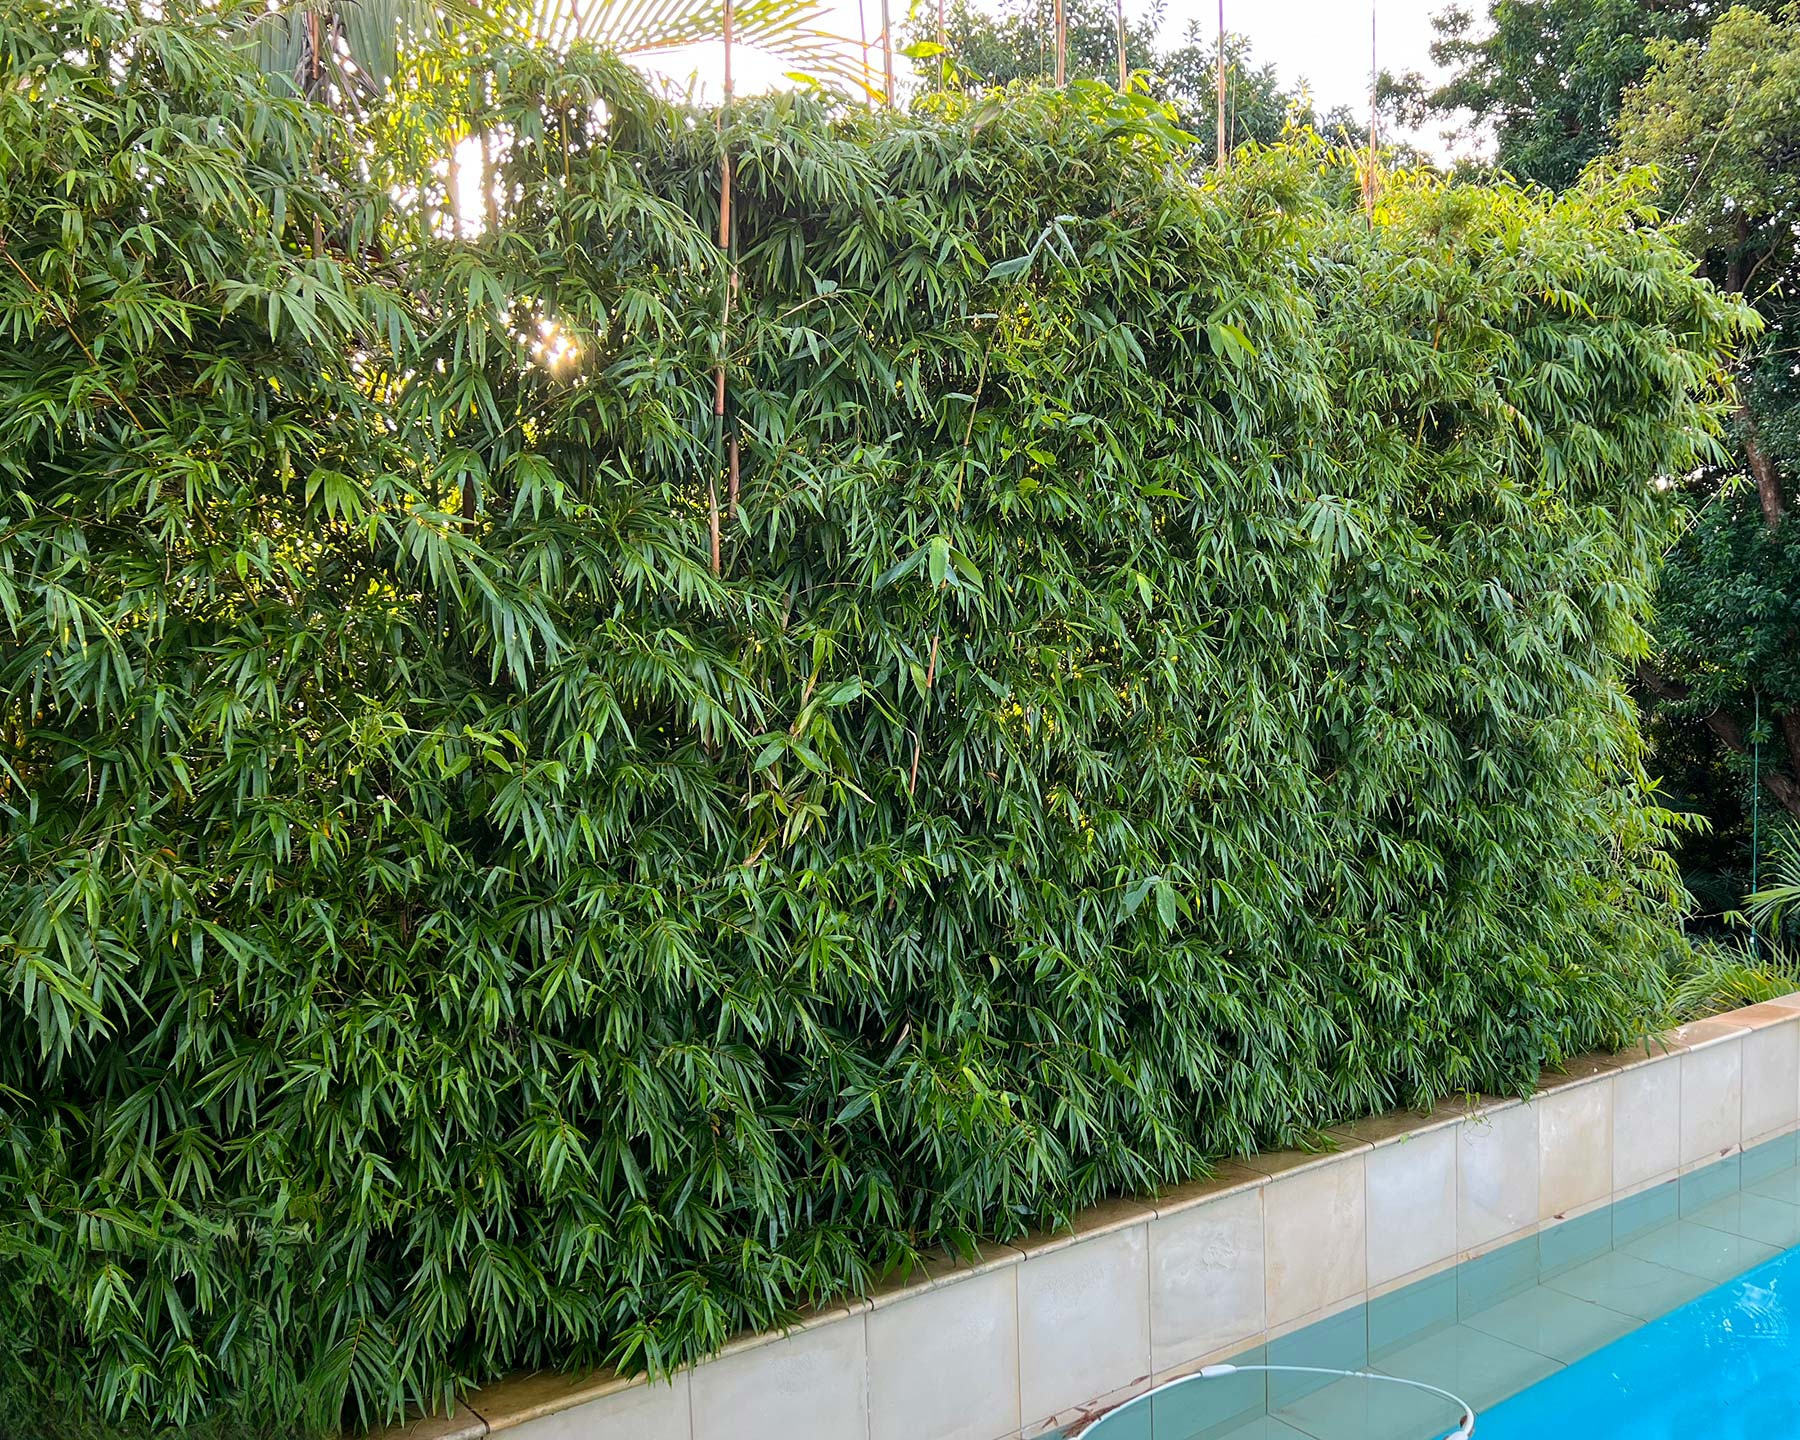 Bambusa multiplex - makes a great hedge